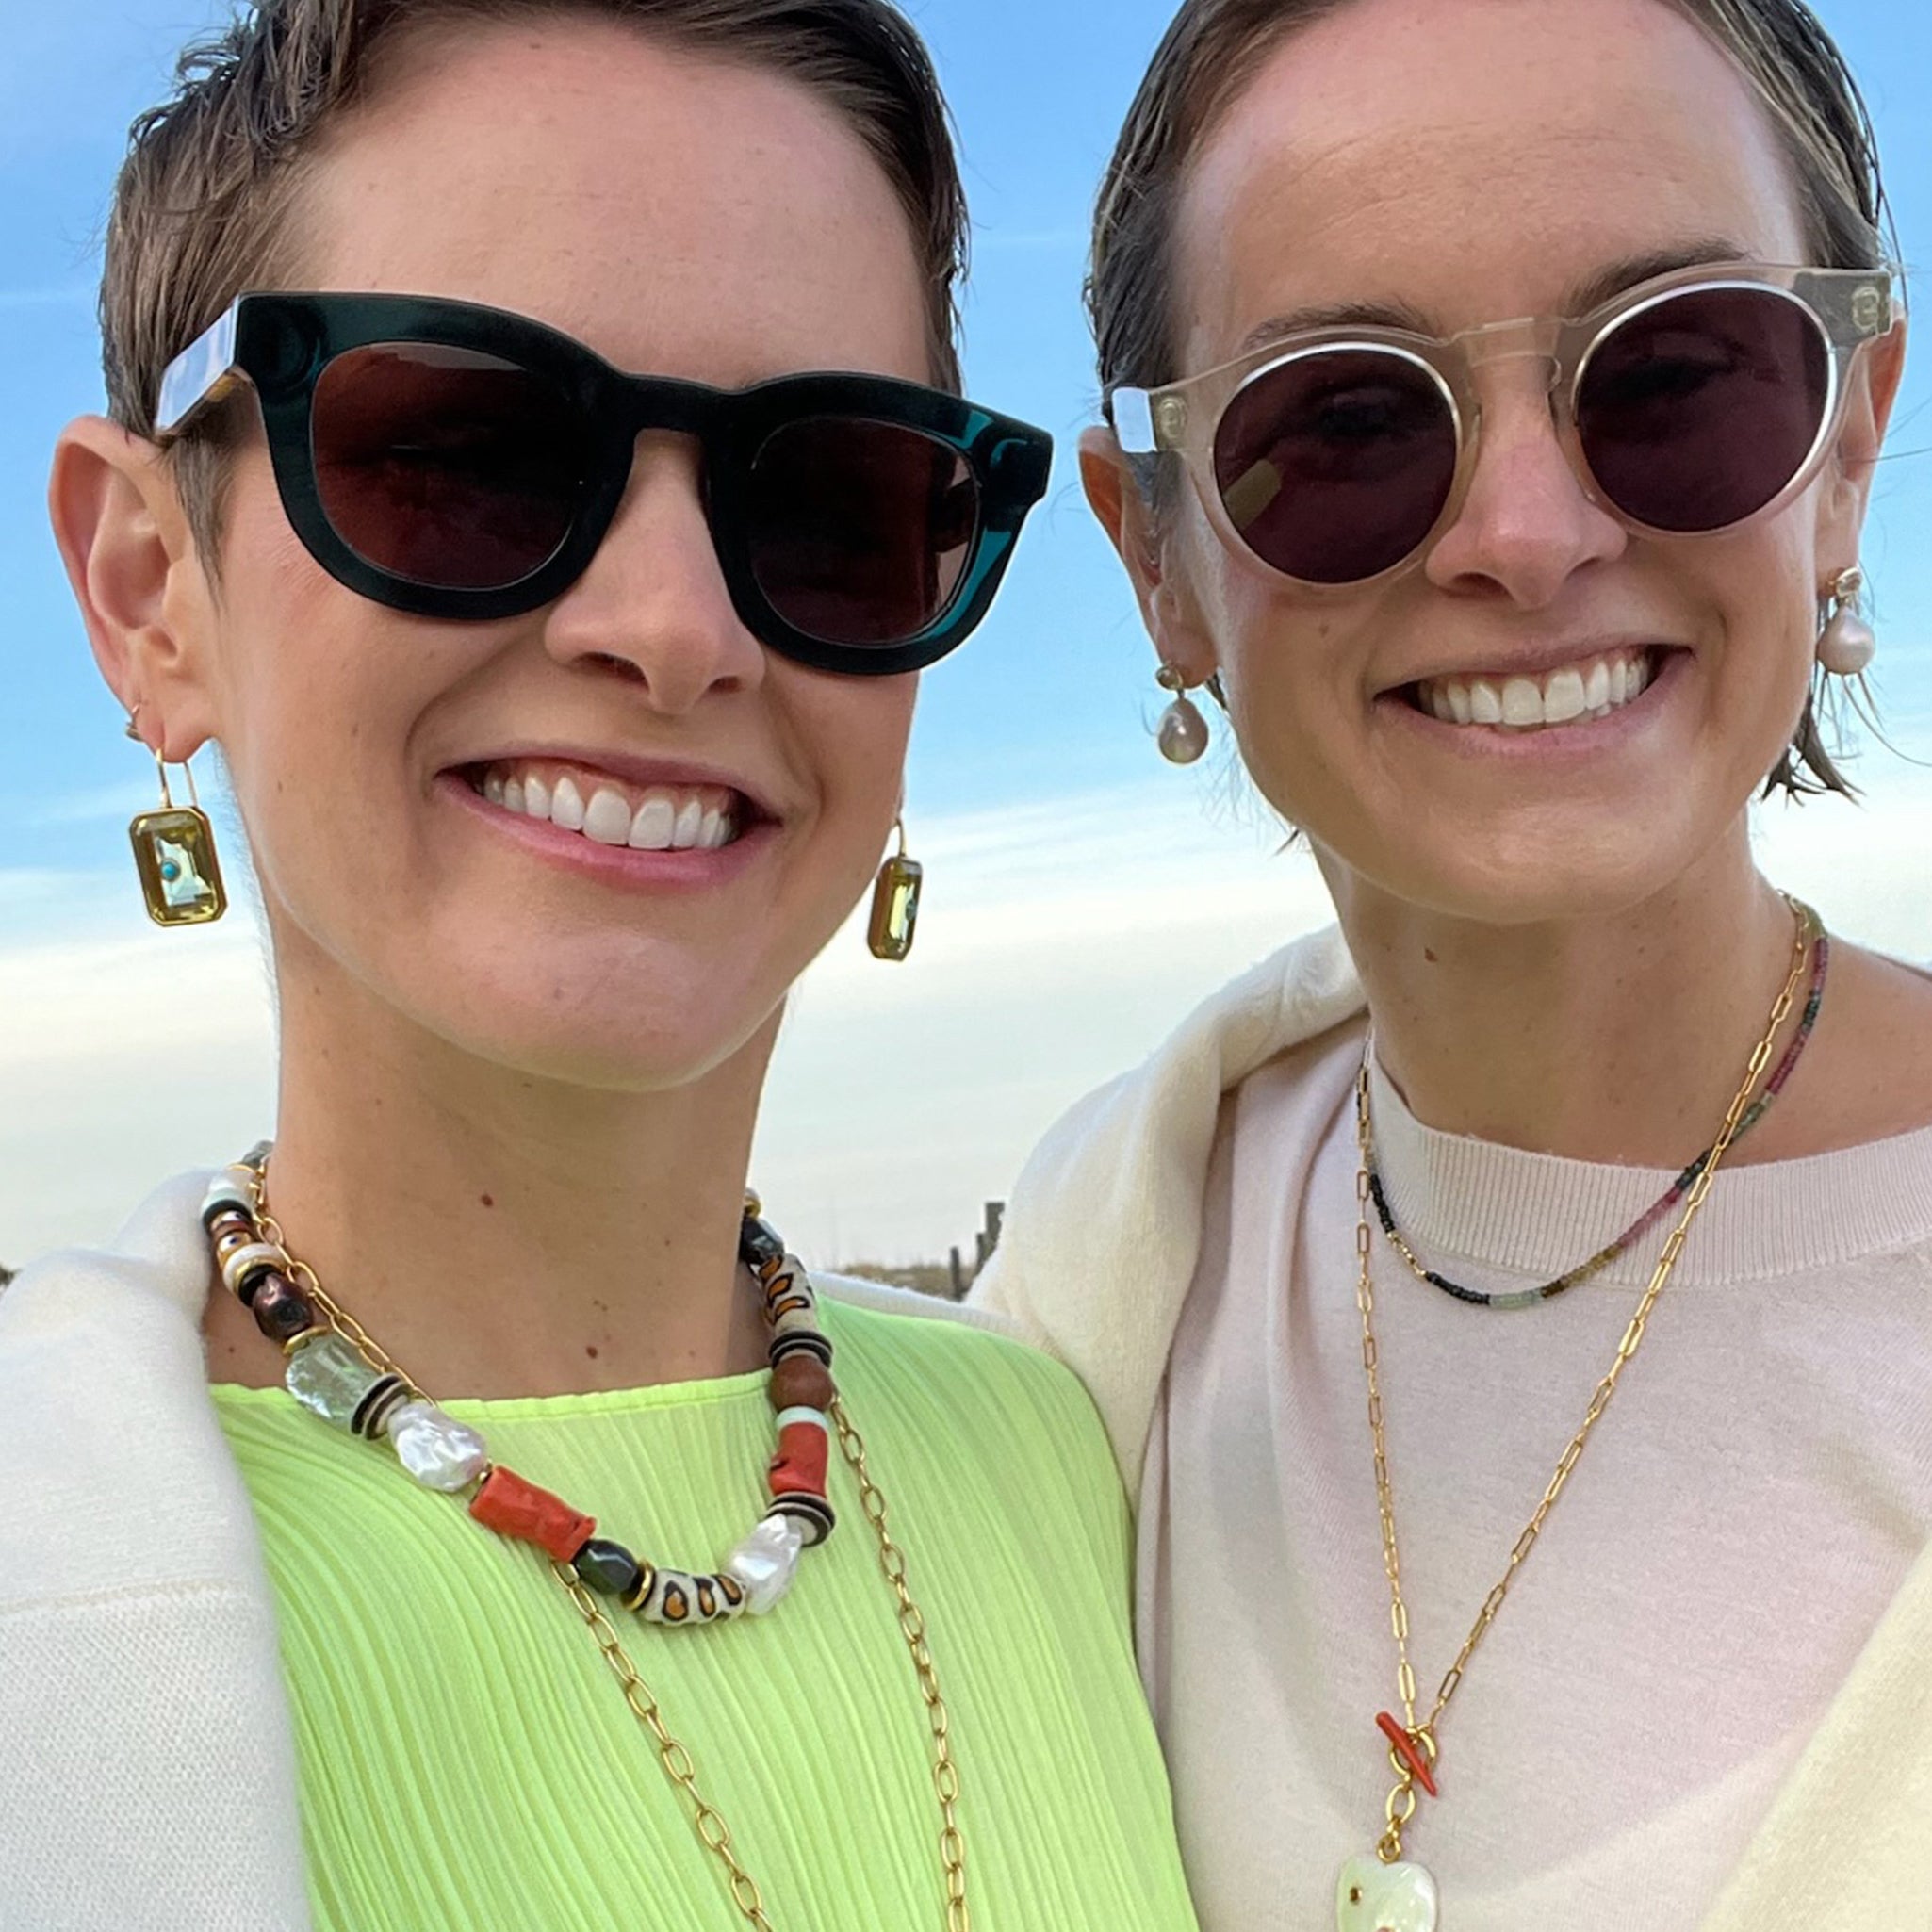 Twins Lizzie and Kathryn wear sunglasses and assorted necklaces and earrings